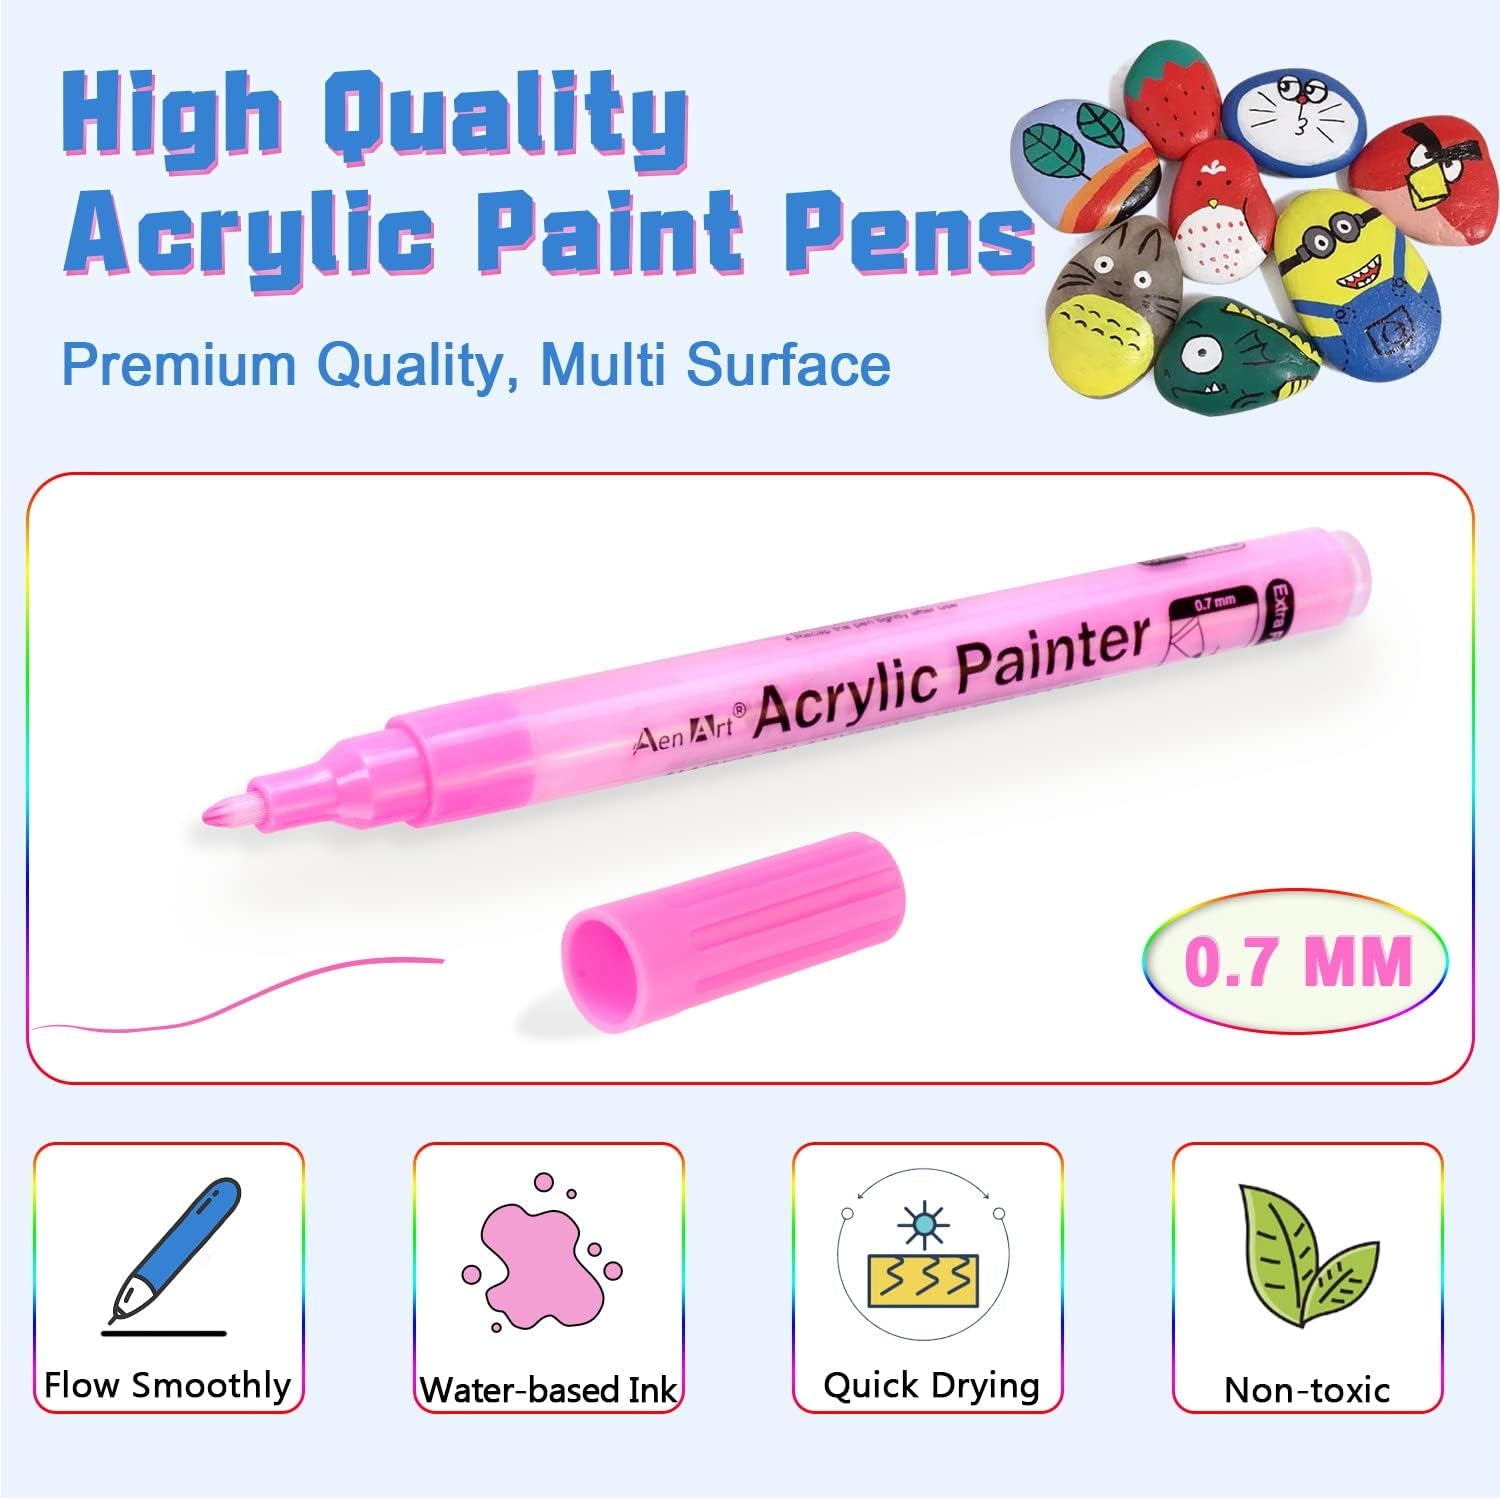 24 Colors Acrylic Paint Pens, Paint Markers for Rock Painting, Fine Point Acrylic Pens Art Supplies for Canvas, Ceramic, Wood, Stone, Glass, DIY Craft